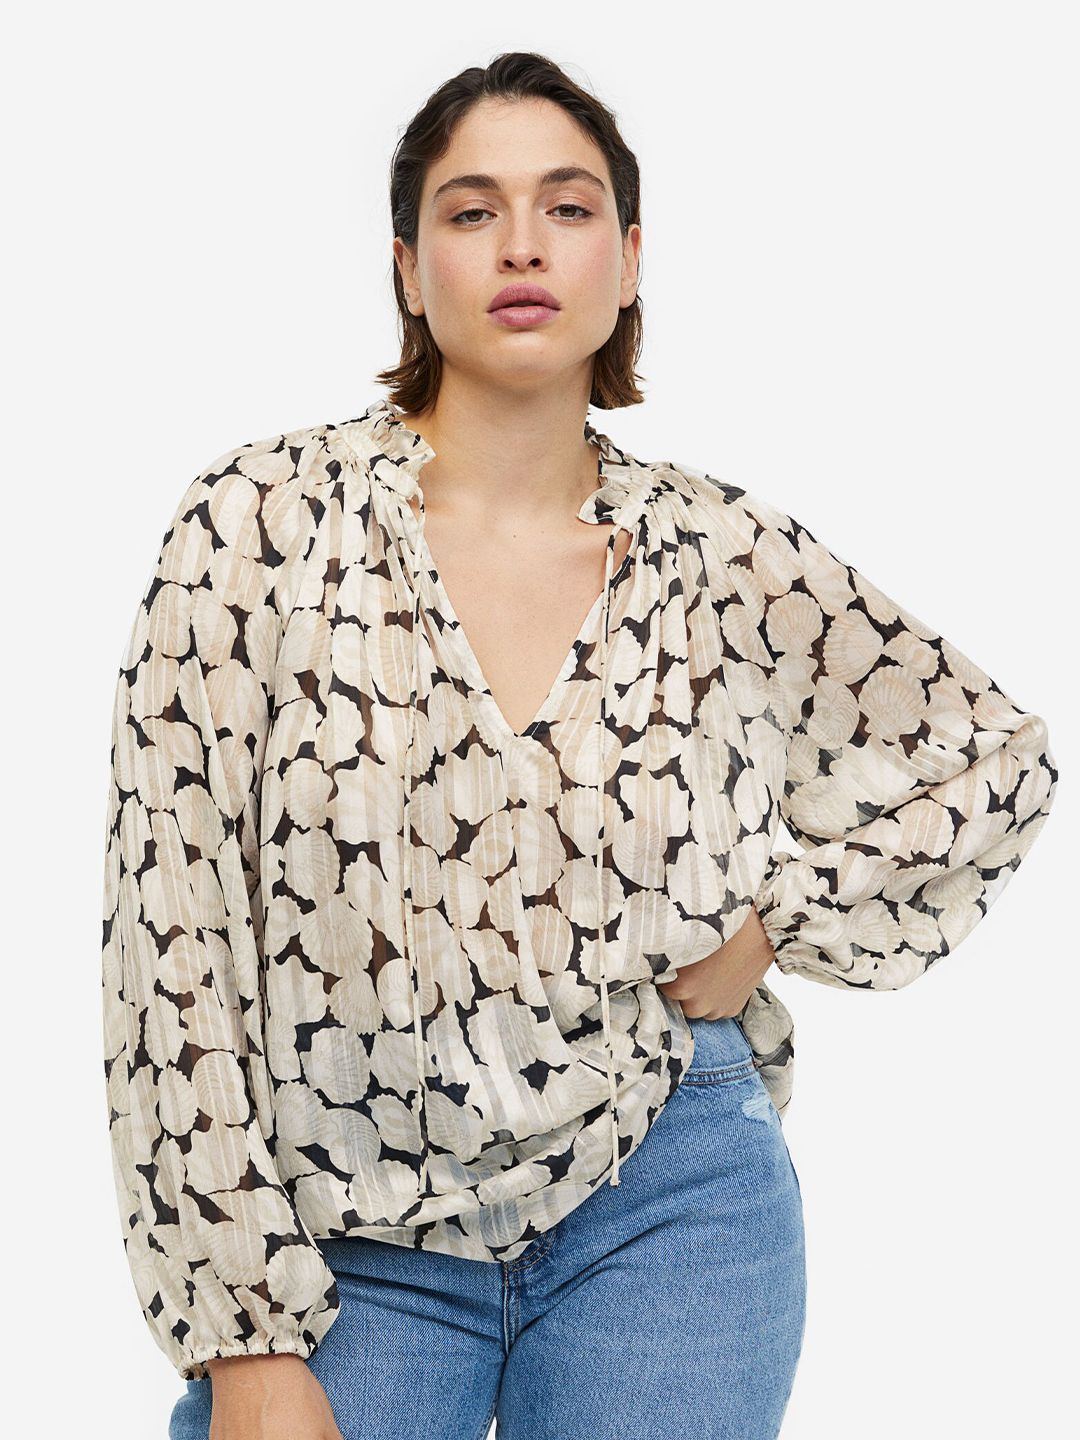 H&M Frill-Trimmed Crepe Blouse Price in India